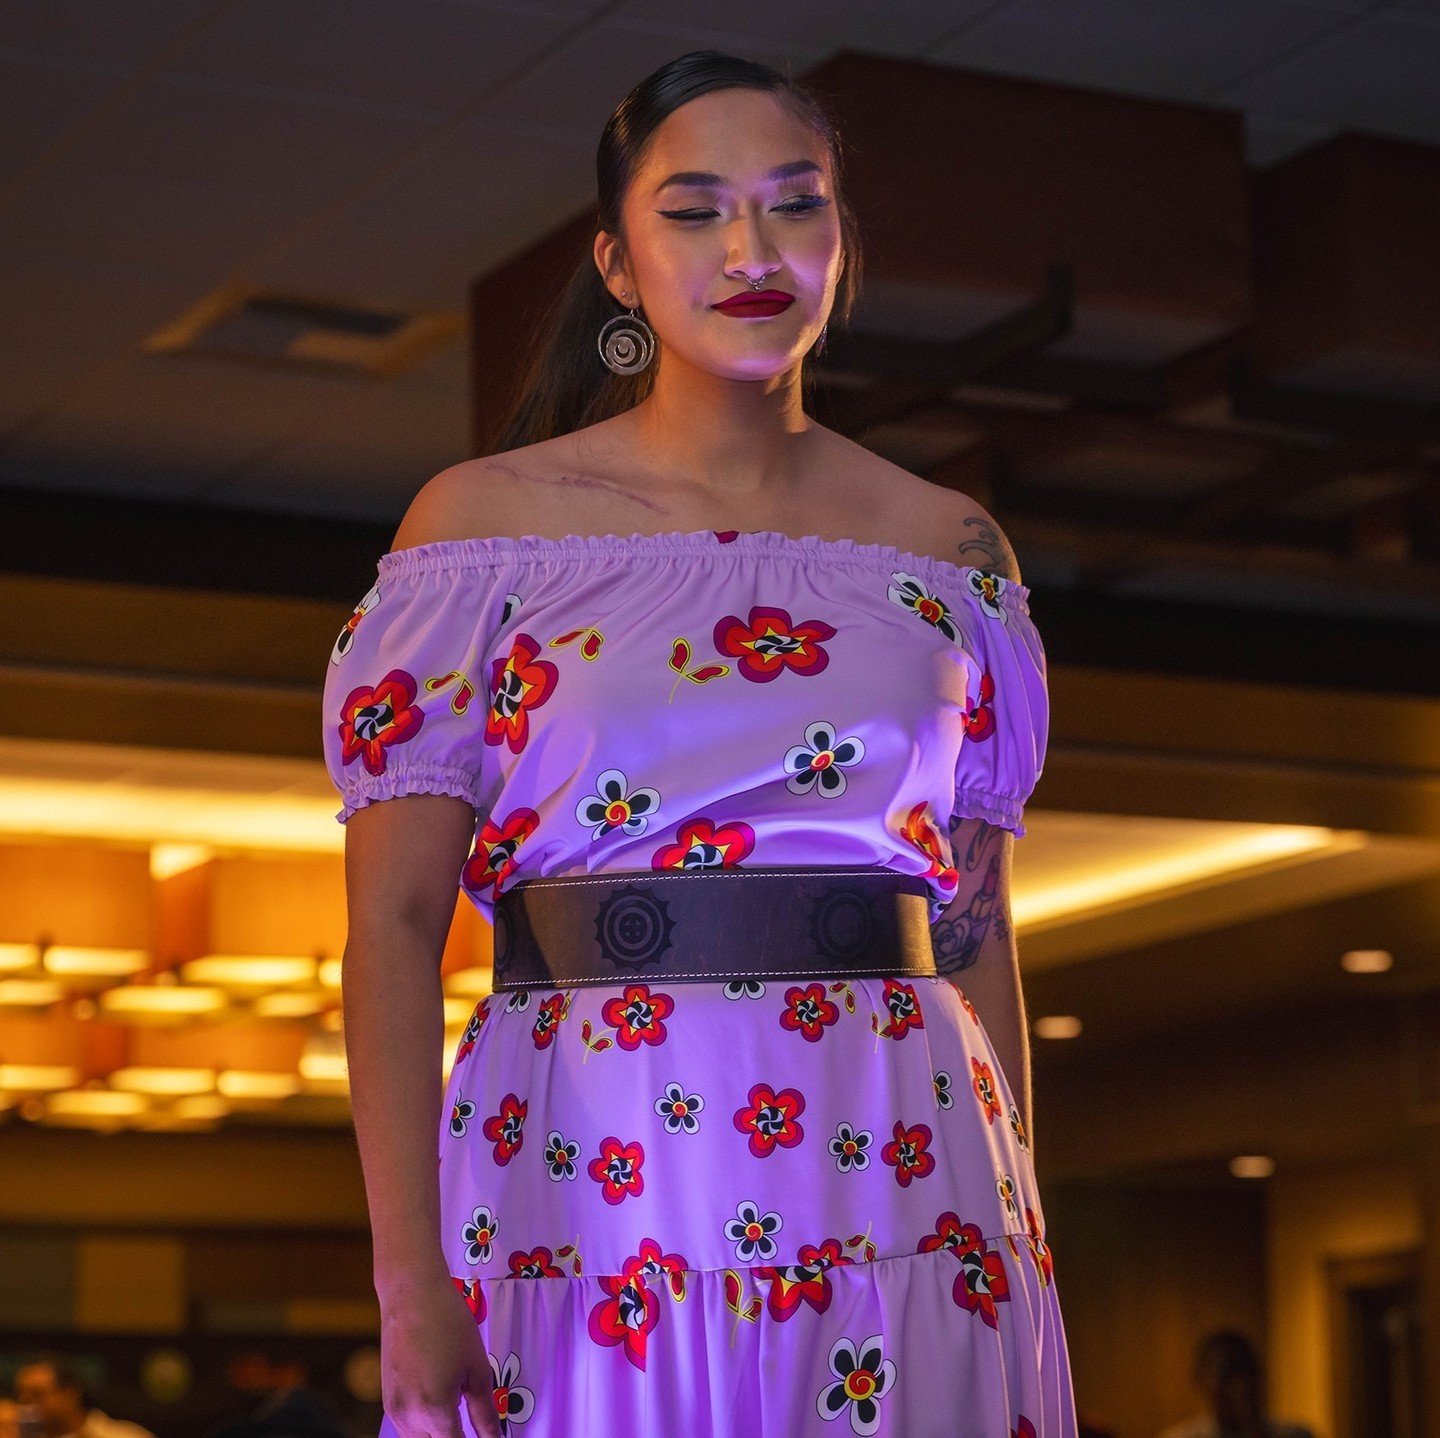 @dezbahrose in the Flower Power maxi dress and Sun Circles belt at the Empowered Indigenous Fashion Show 🌸☀️⁠
⁠
Photo: @comanche_mike⁠
.⁠
.⁠
.⁠
#fashionshow #mvskoke #indigenous #muscogee #indigenousfashion #indigenousart #nativepride #indigenouswom